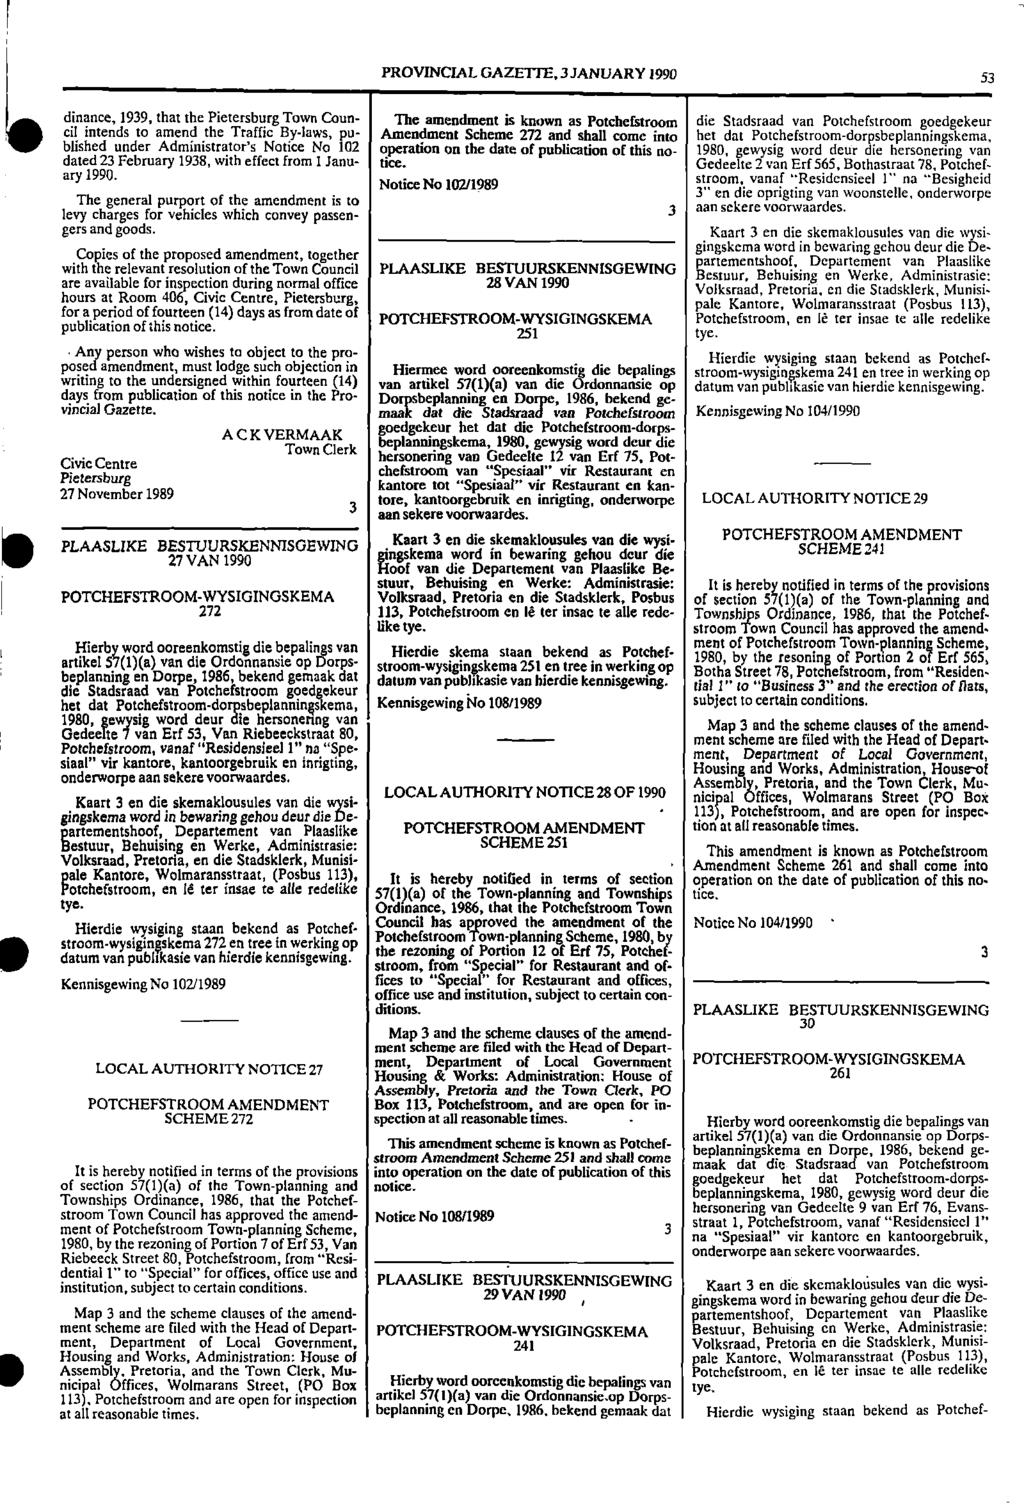 1 PROVNCAL GAZETTE, 3 JANUARY 1990 53 ii dinance, 1939, that the Pietersburg Town Conn The amendment is known as Potchefstroom die Stadsraad van Potchefstroom goedgekeur al intends to amend the